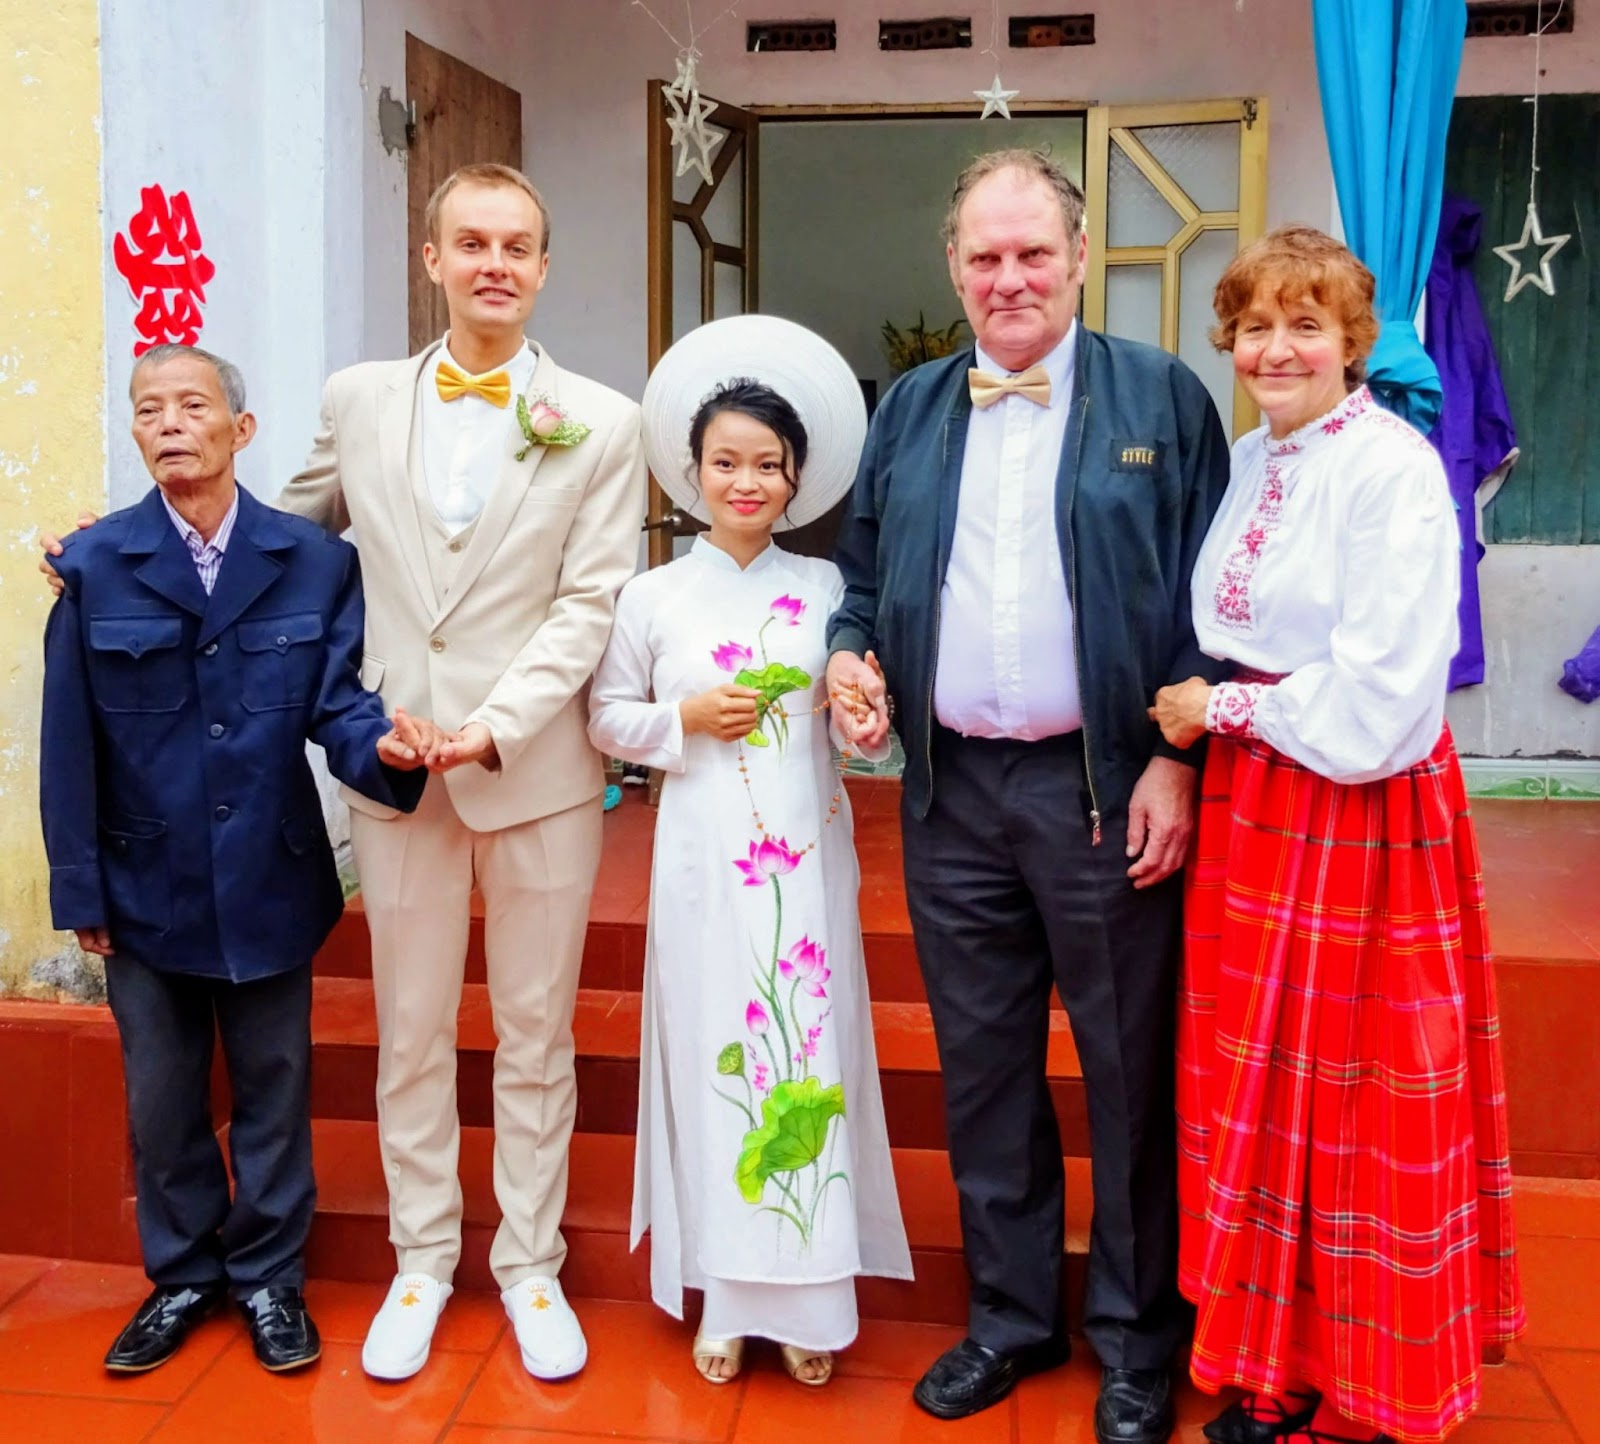 Estonian Meigo Mark (second from left) and his wife Nguyen Thi Sam pose for a picture with their family members at their wedding in Thai Binh Province, Vietnam in October, 2018. Photo by courtesy by Meigo Mark